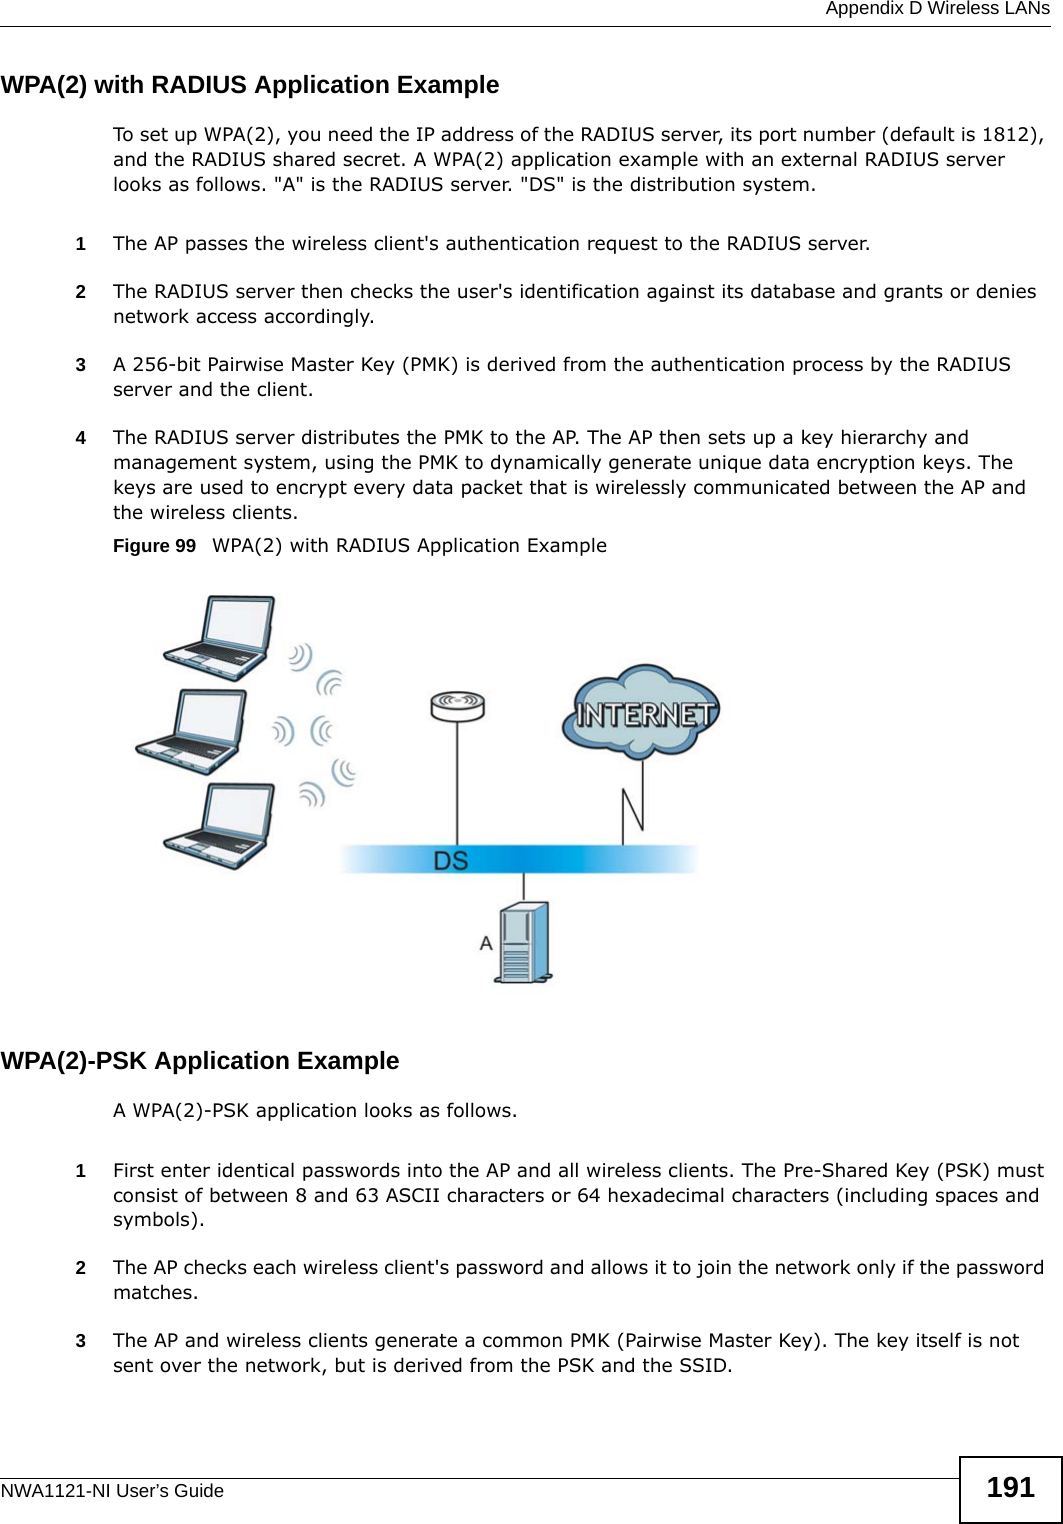  Appendix D Wireless LANsNWA1121-NI User’s Guide 191WPA(2) with RADIUS Application ExampleTo set up WPA(2), you need the IP address of the RADIUS server, its port number (default is 1812), and the RADIUS shared secret. A WPA(2) application example with an external RADIUS server looks as follows. &quot;A&quot; is the RADIUS server. &quot;DS&quot; is the distribution system.1The AP passes the wireless client&apos;s authentication request to the RADIUS server.2The RADIUS server then checks the user&apos;s identification against its database and grants or denies network access accordingly.3A 256-bit Pairwise Master Key (PMK) is derived from the authentication process by the RADIUS server and the client.4The RADIUS server distributes the PMK to the AP. The AP then sets up a key hierarchy and management system, using the PMK to dynamically generate unique data encryption keys. The keys are used to encrypt every data packet that is wirelessly communicated between the AP and the wireless clients.Figure 99   WPA(2) with RADIUS Application ExampleWPA(2)-PSK Application ExampleA WPA(2)-PSK application looks as follows.1First enter identical passwords into the AP and all wireless clients. The Pre-Shared Key (PSK) must consist of between 8 and 63 ASCII characters or 64 hexadecimal characters (including spaces and symbols).2The AP checks each wireless client&apos;s password and allows it to join the network only if the password matches.3The AP and wireless clients generate a common PMK (Pairwise Master Key). The key itself is not sent over the network, but is derived from the PSK and the SSID. 